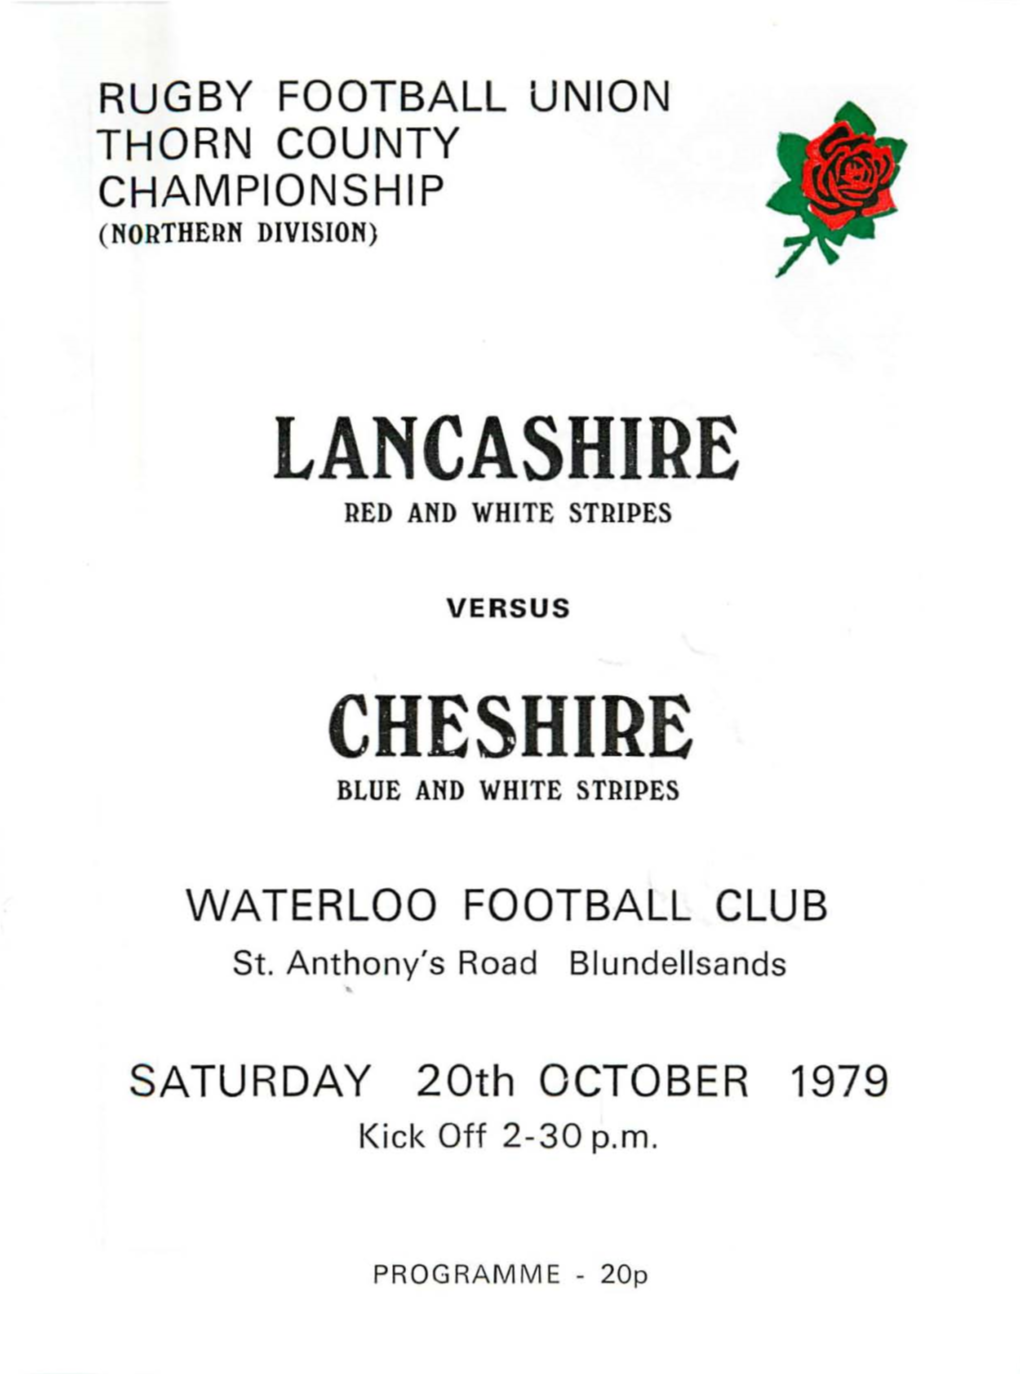 Lancashire Red and White Stripes